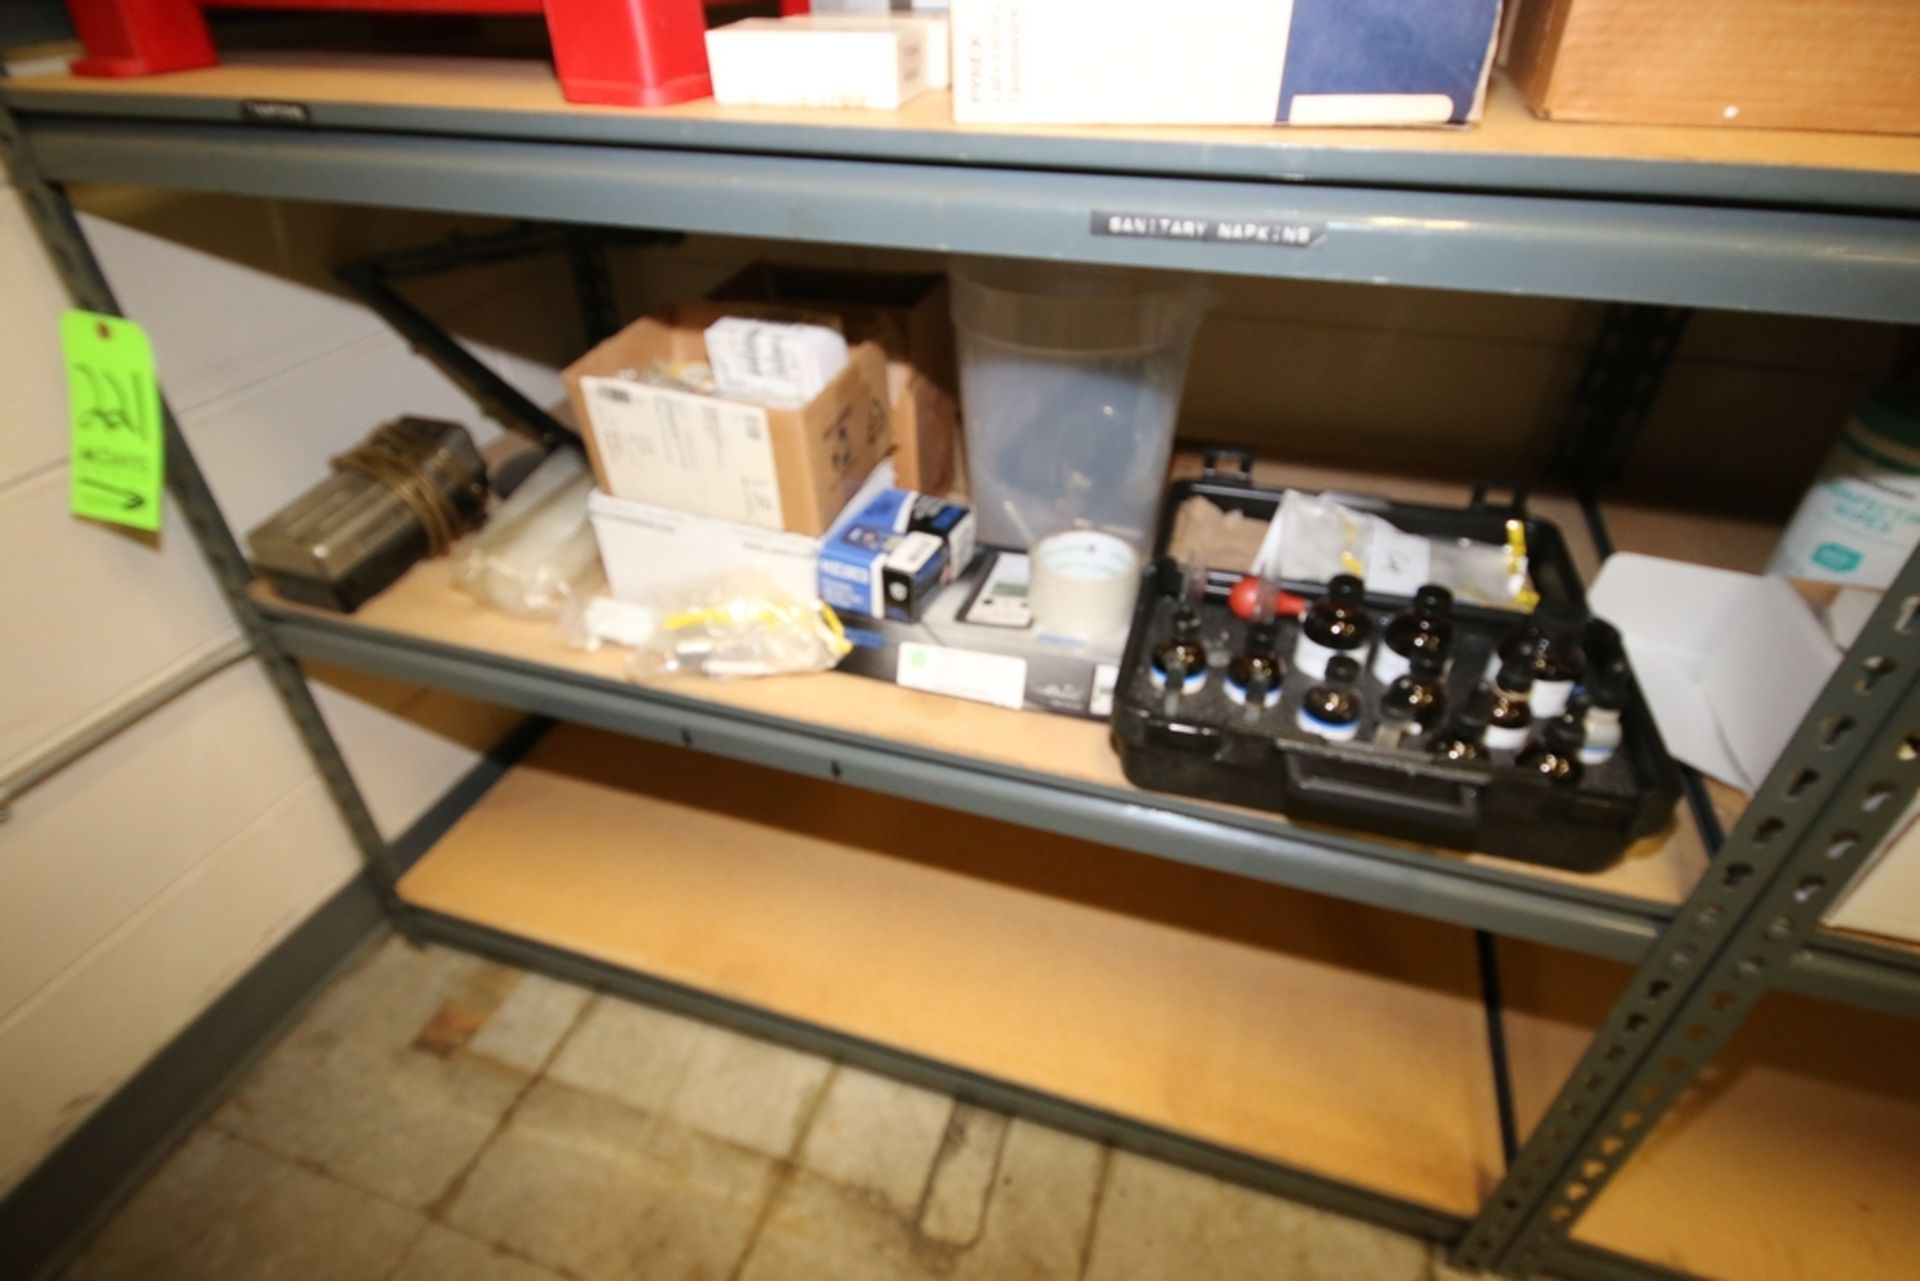 Contents of Shelf, Includes Lab Plastic Ware in Boxes, Solvent Drip Kit in Hard Case, Plastic Lab - Image 2 of 3